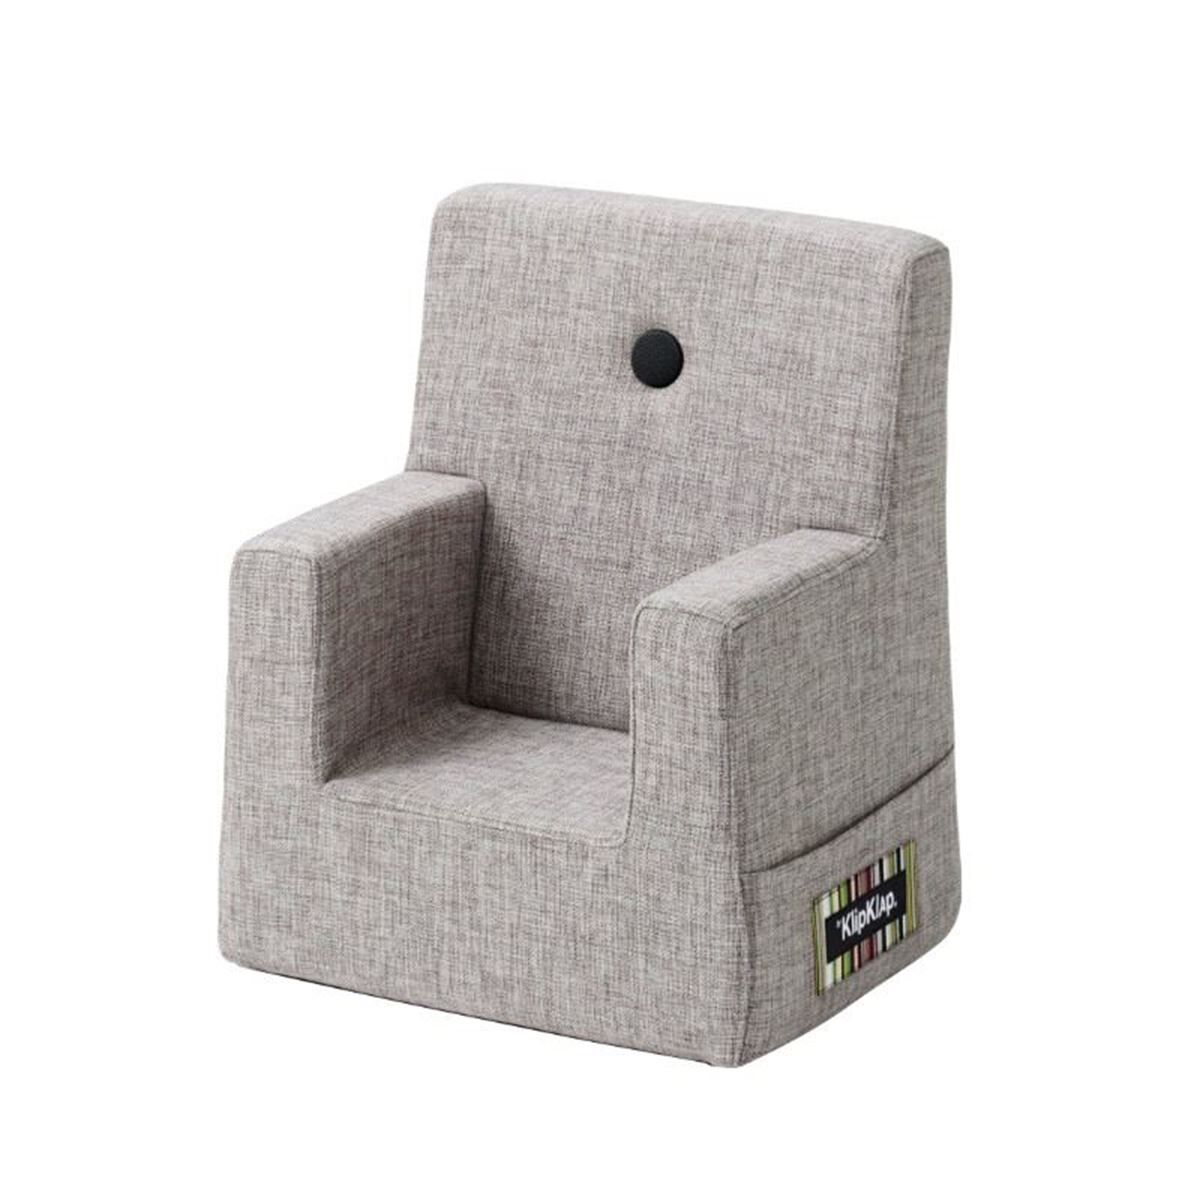 byKlipKlap Kids Chair - Multi grey with grey buttons